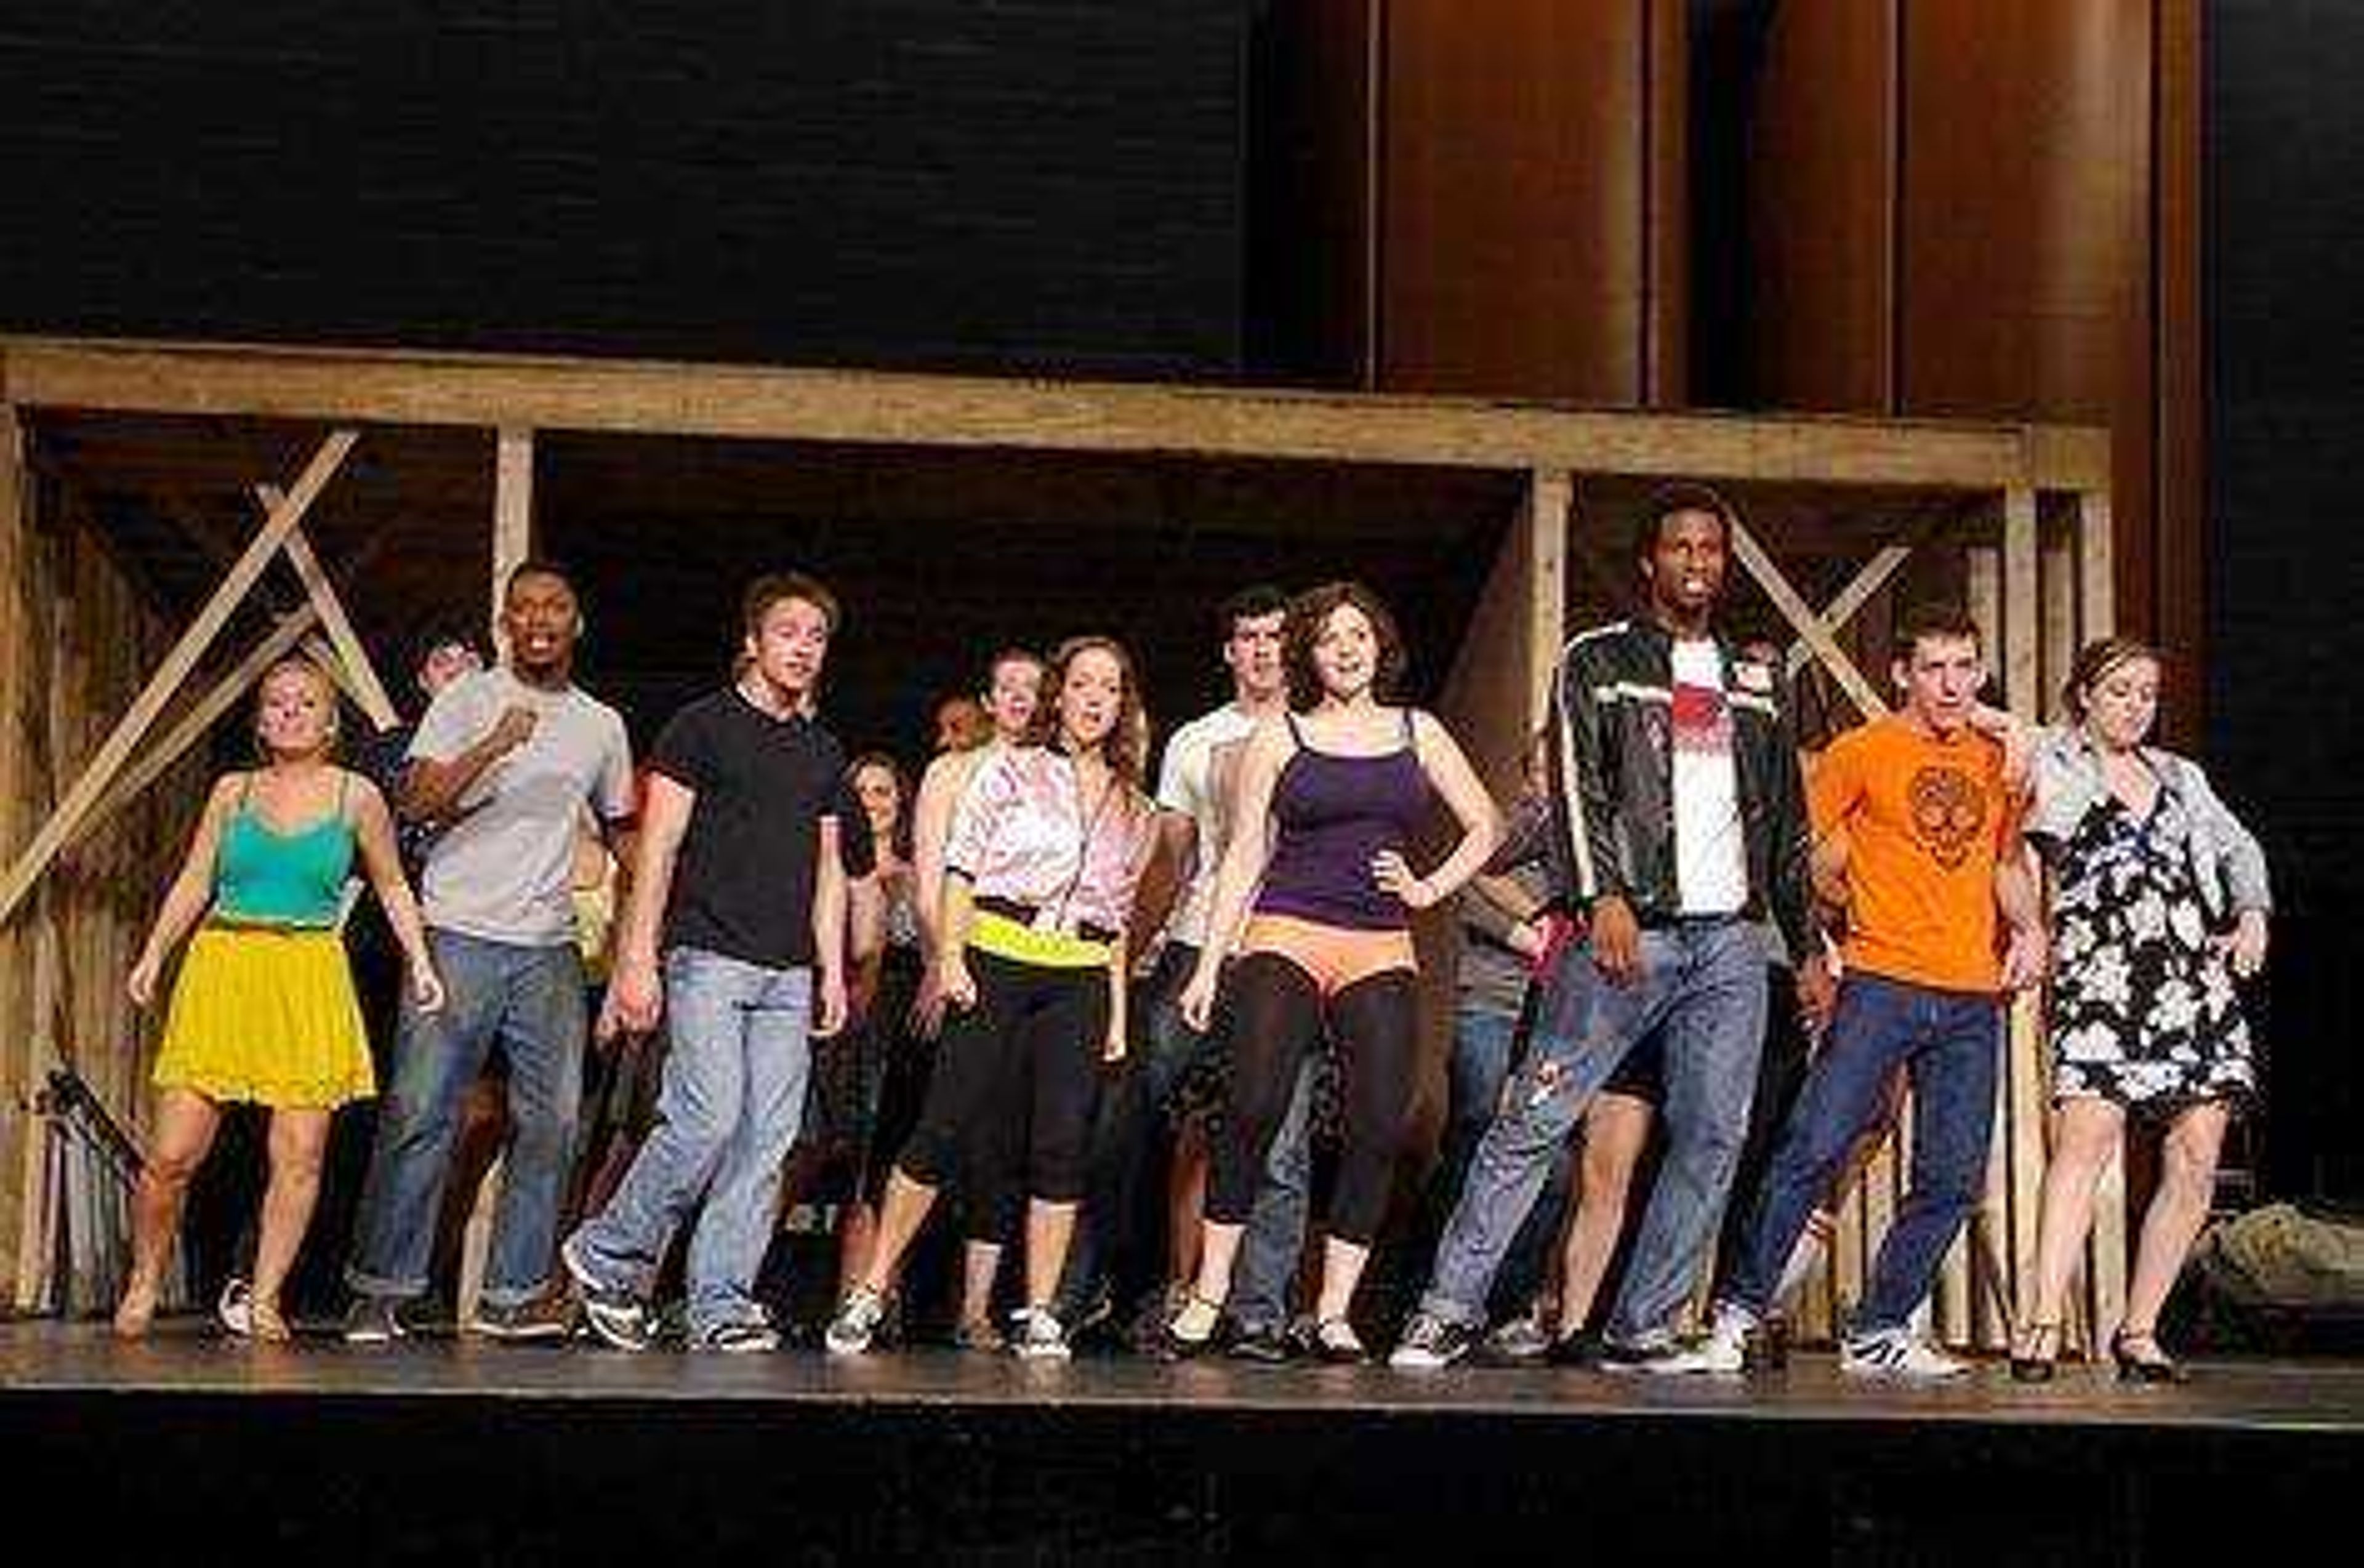 The cast of the upcoming production "Grease" rehearse a musical number at Donald C. Bedell Performance Hall. Photo by Nathan Hamilton